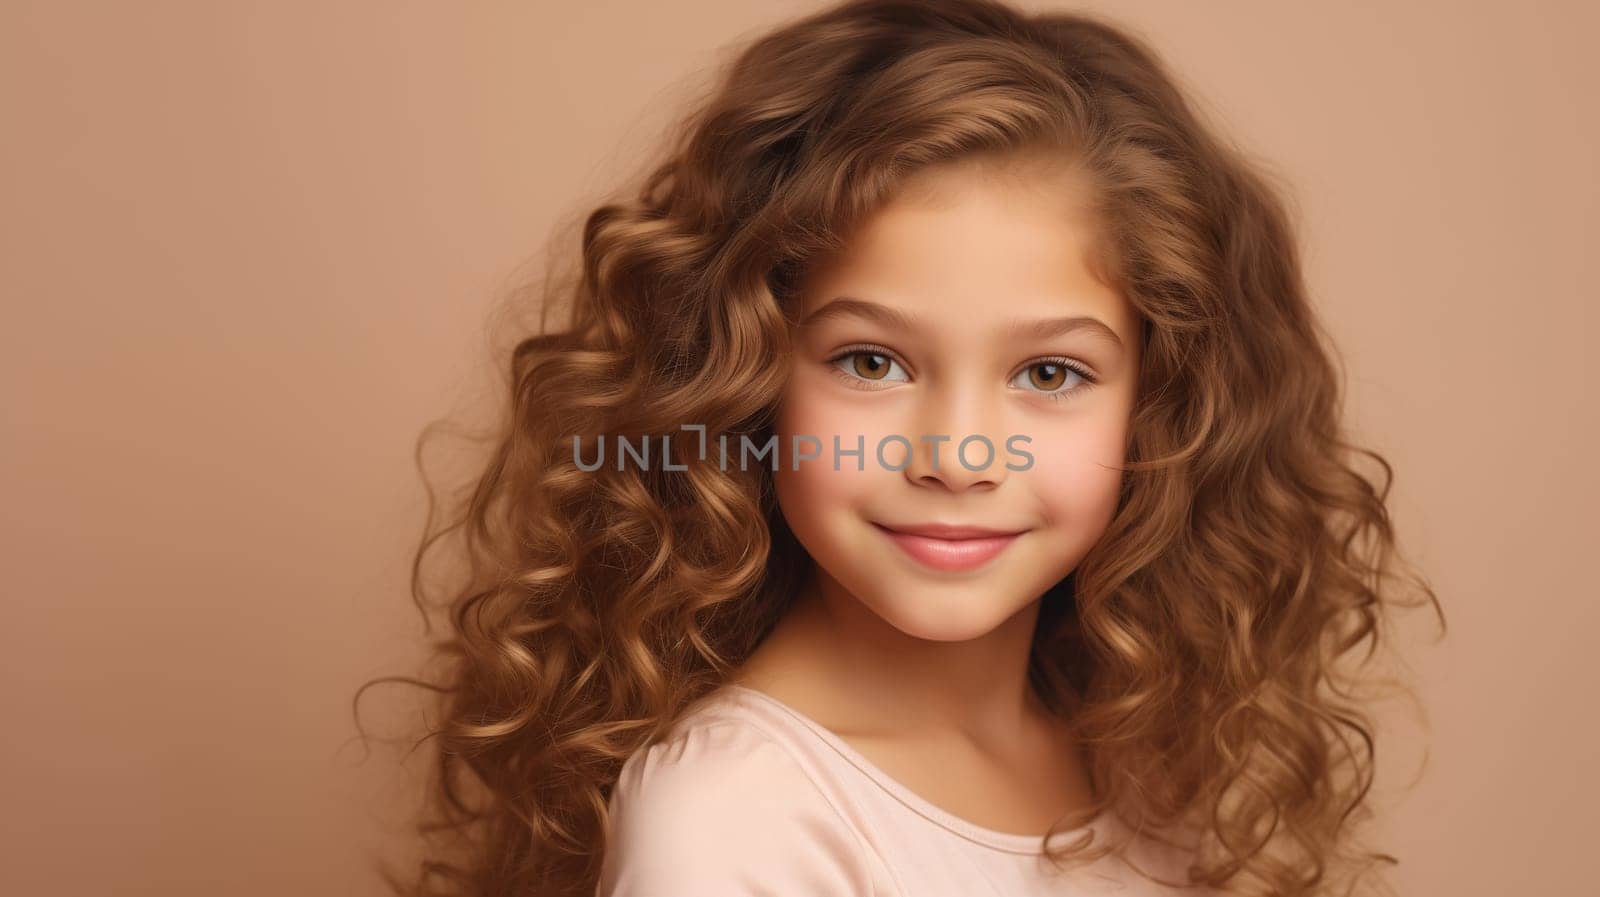 Beauty portrait pretty little girl child looking at camera on beige background by Rohappy